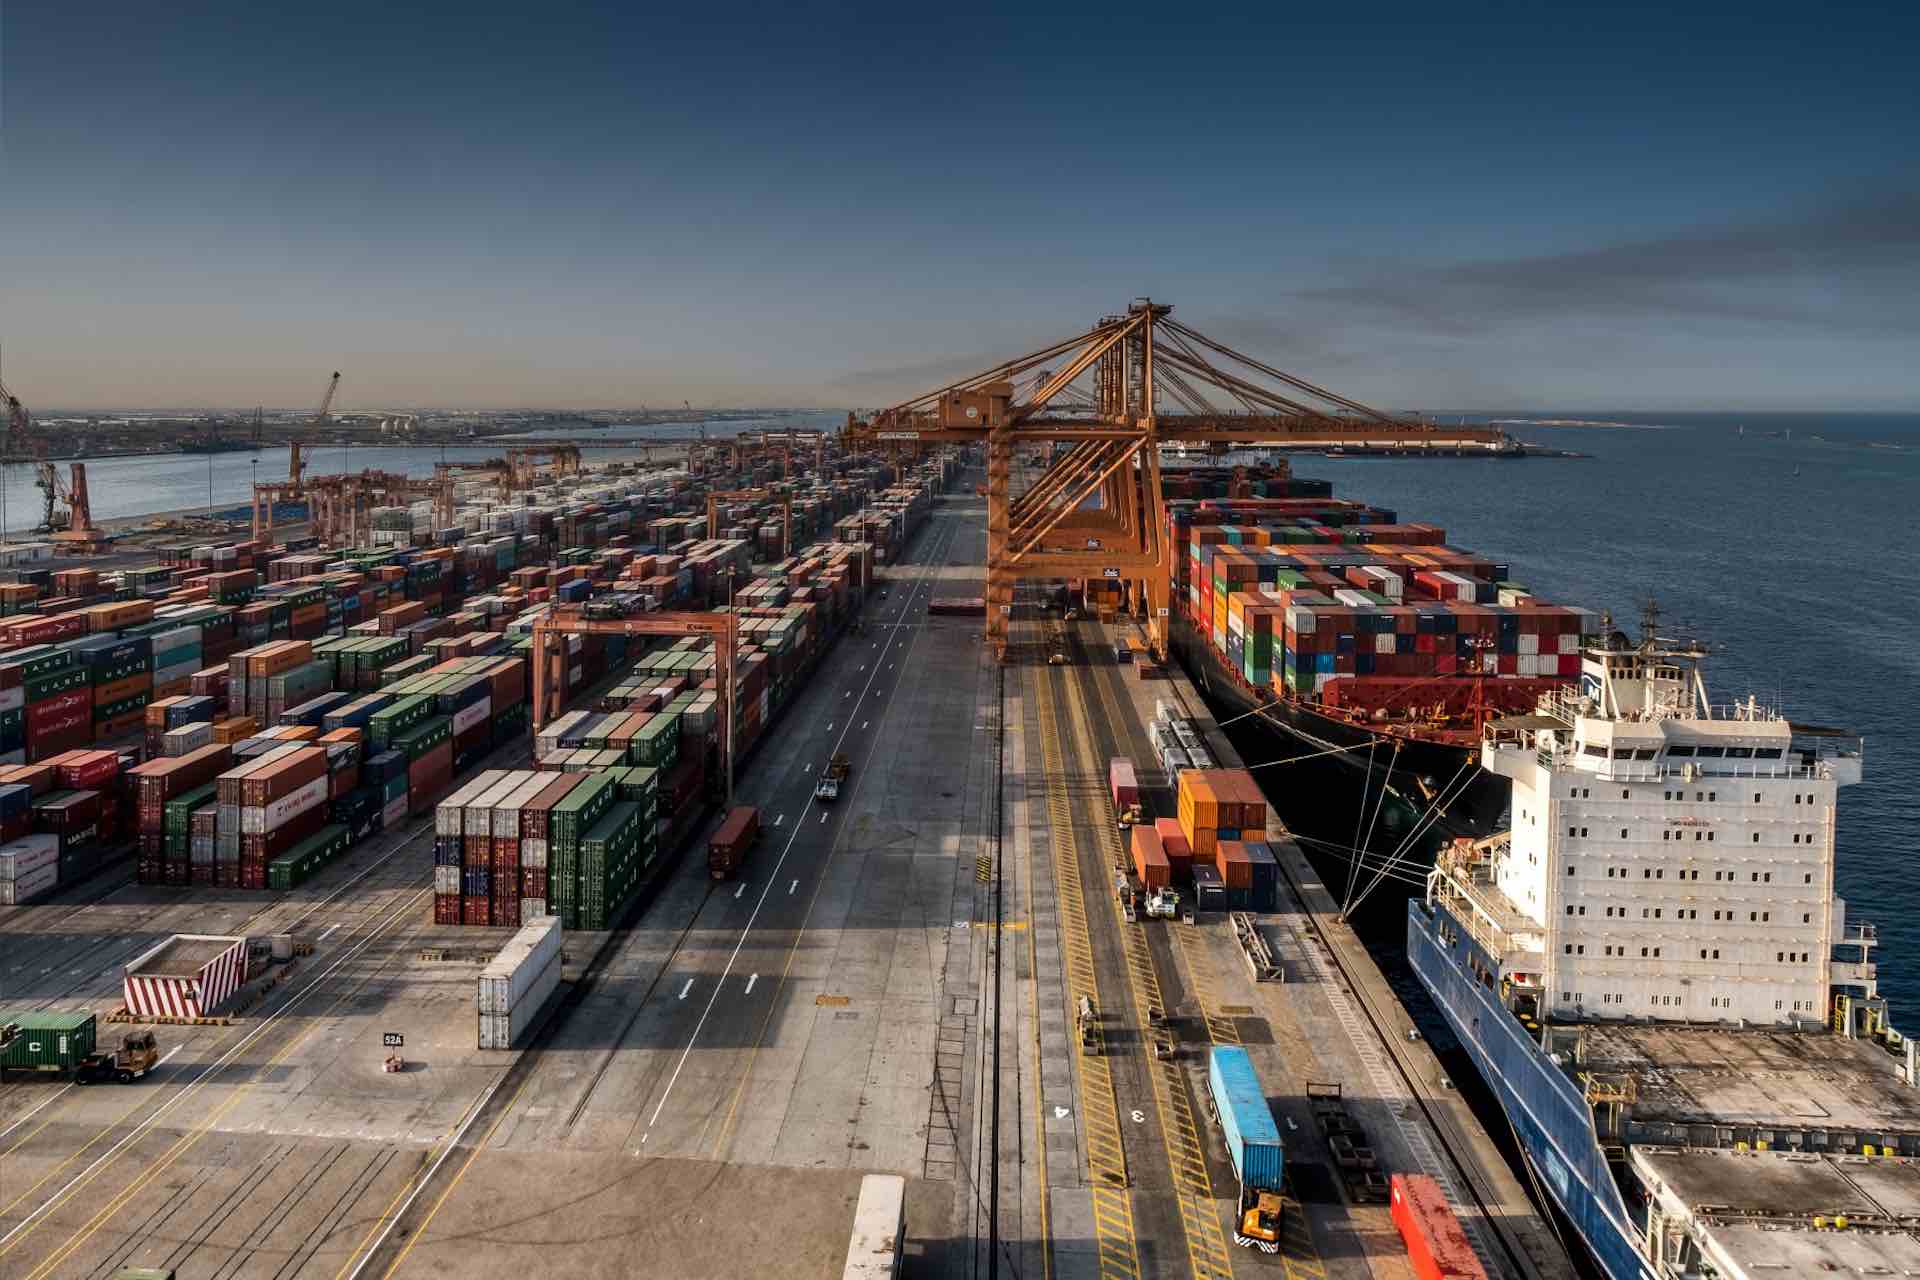 Global supply chain congestion eased with new trade routes from DP World